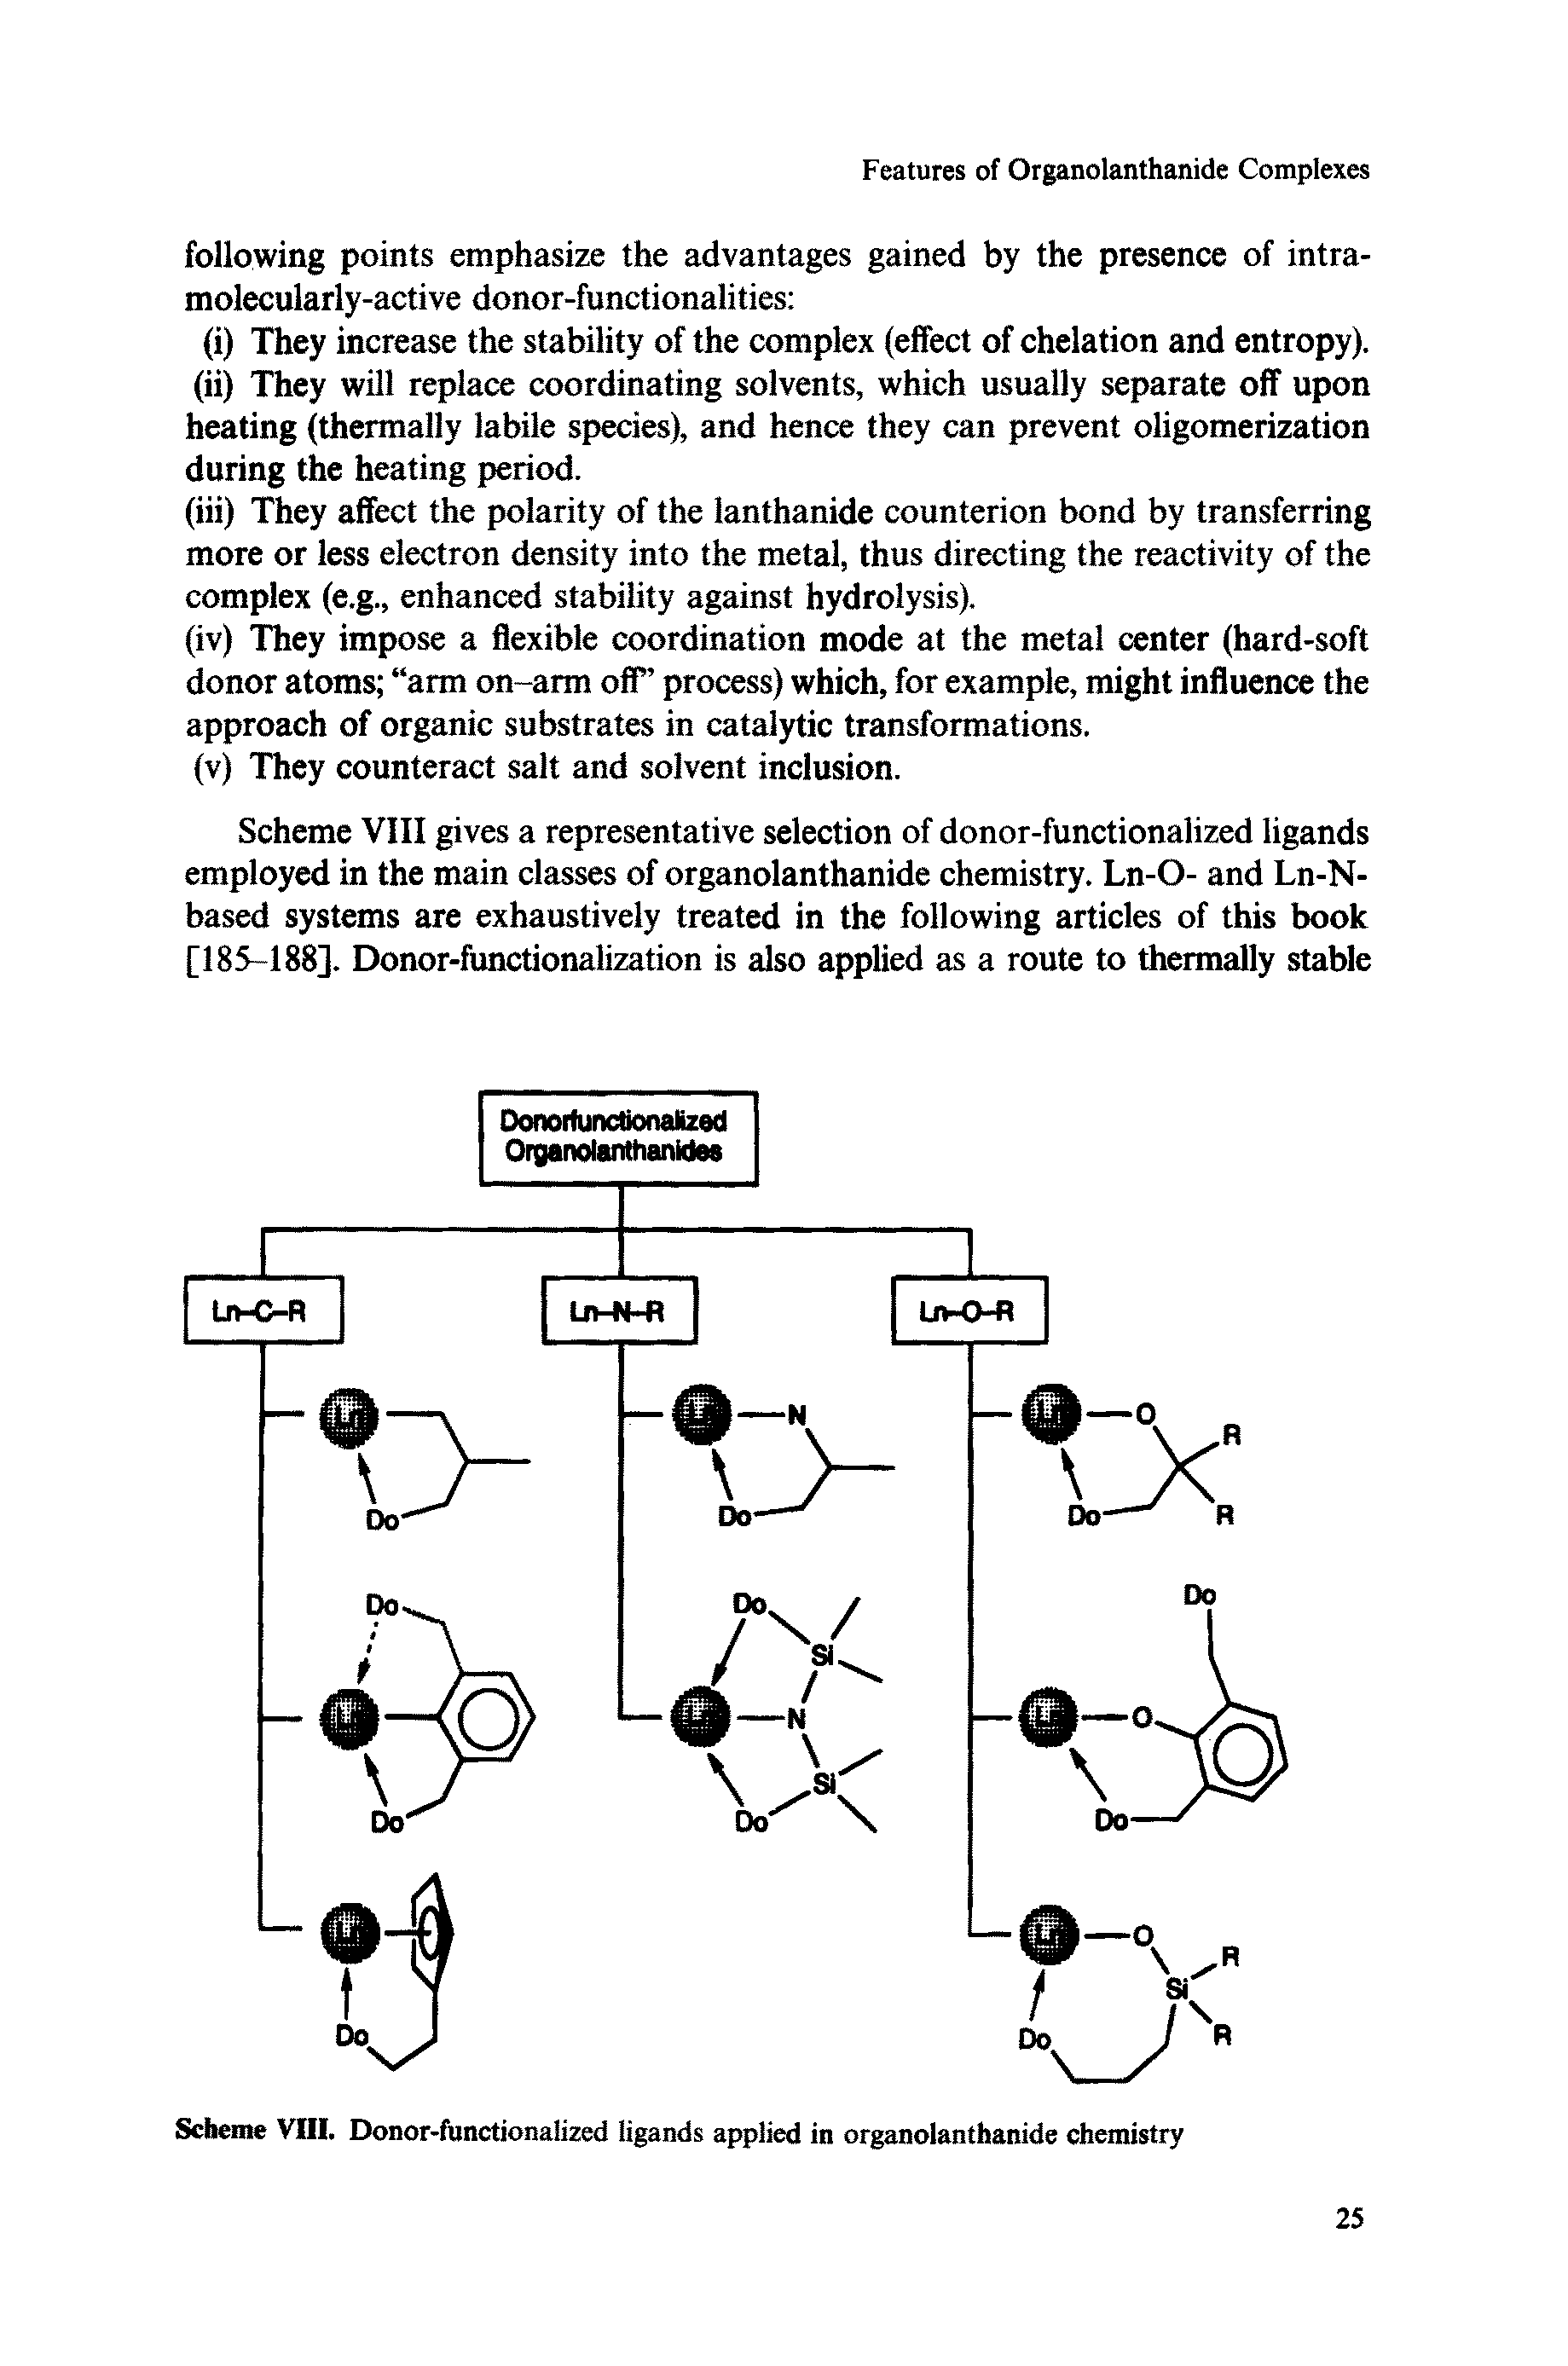 Scheme VIII gives a representative selection of donor-functionalized ligands employed in the main classes of organolanthanide chemistry. Ln-O- and Ln-N-based systems are exhaustively treated in the following articles of this book [185-188]. Donor-functionalization is also applied as a route to thermally stable...